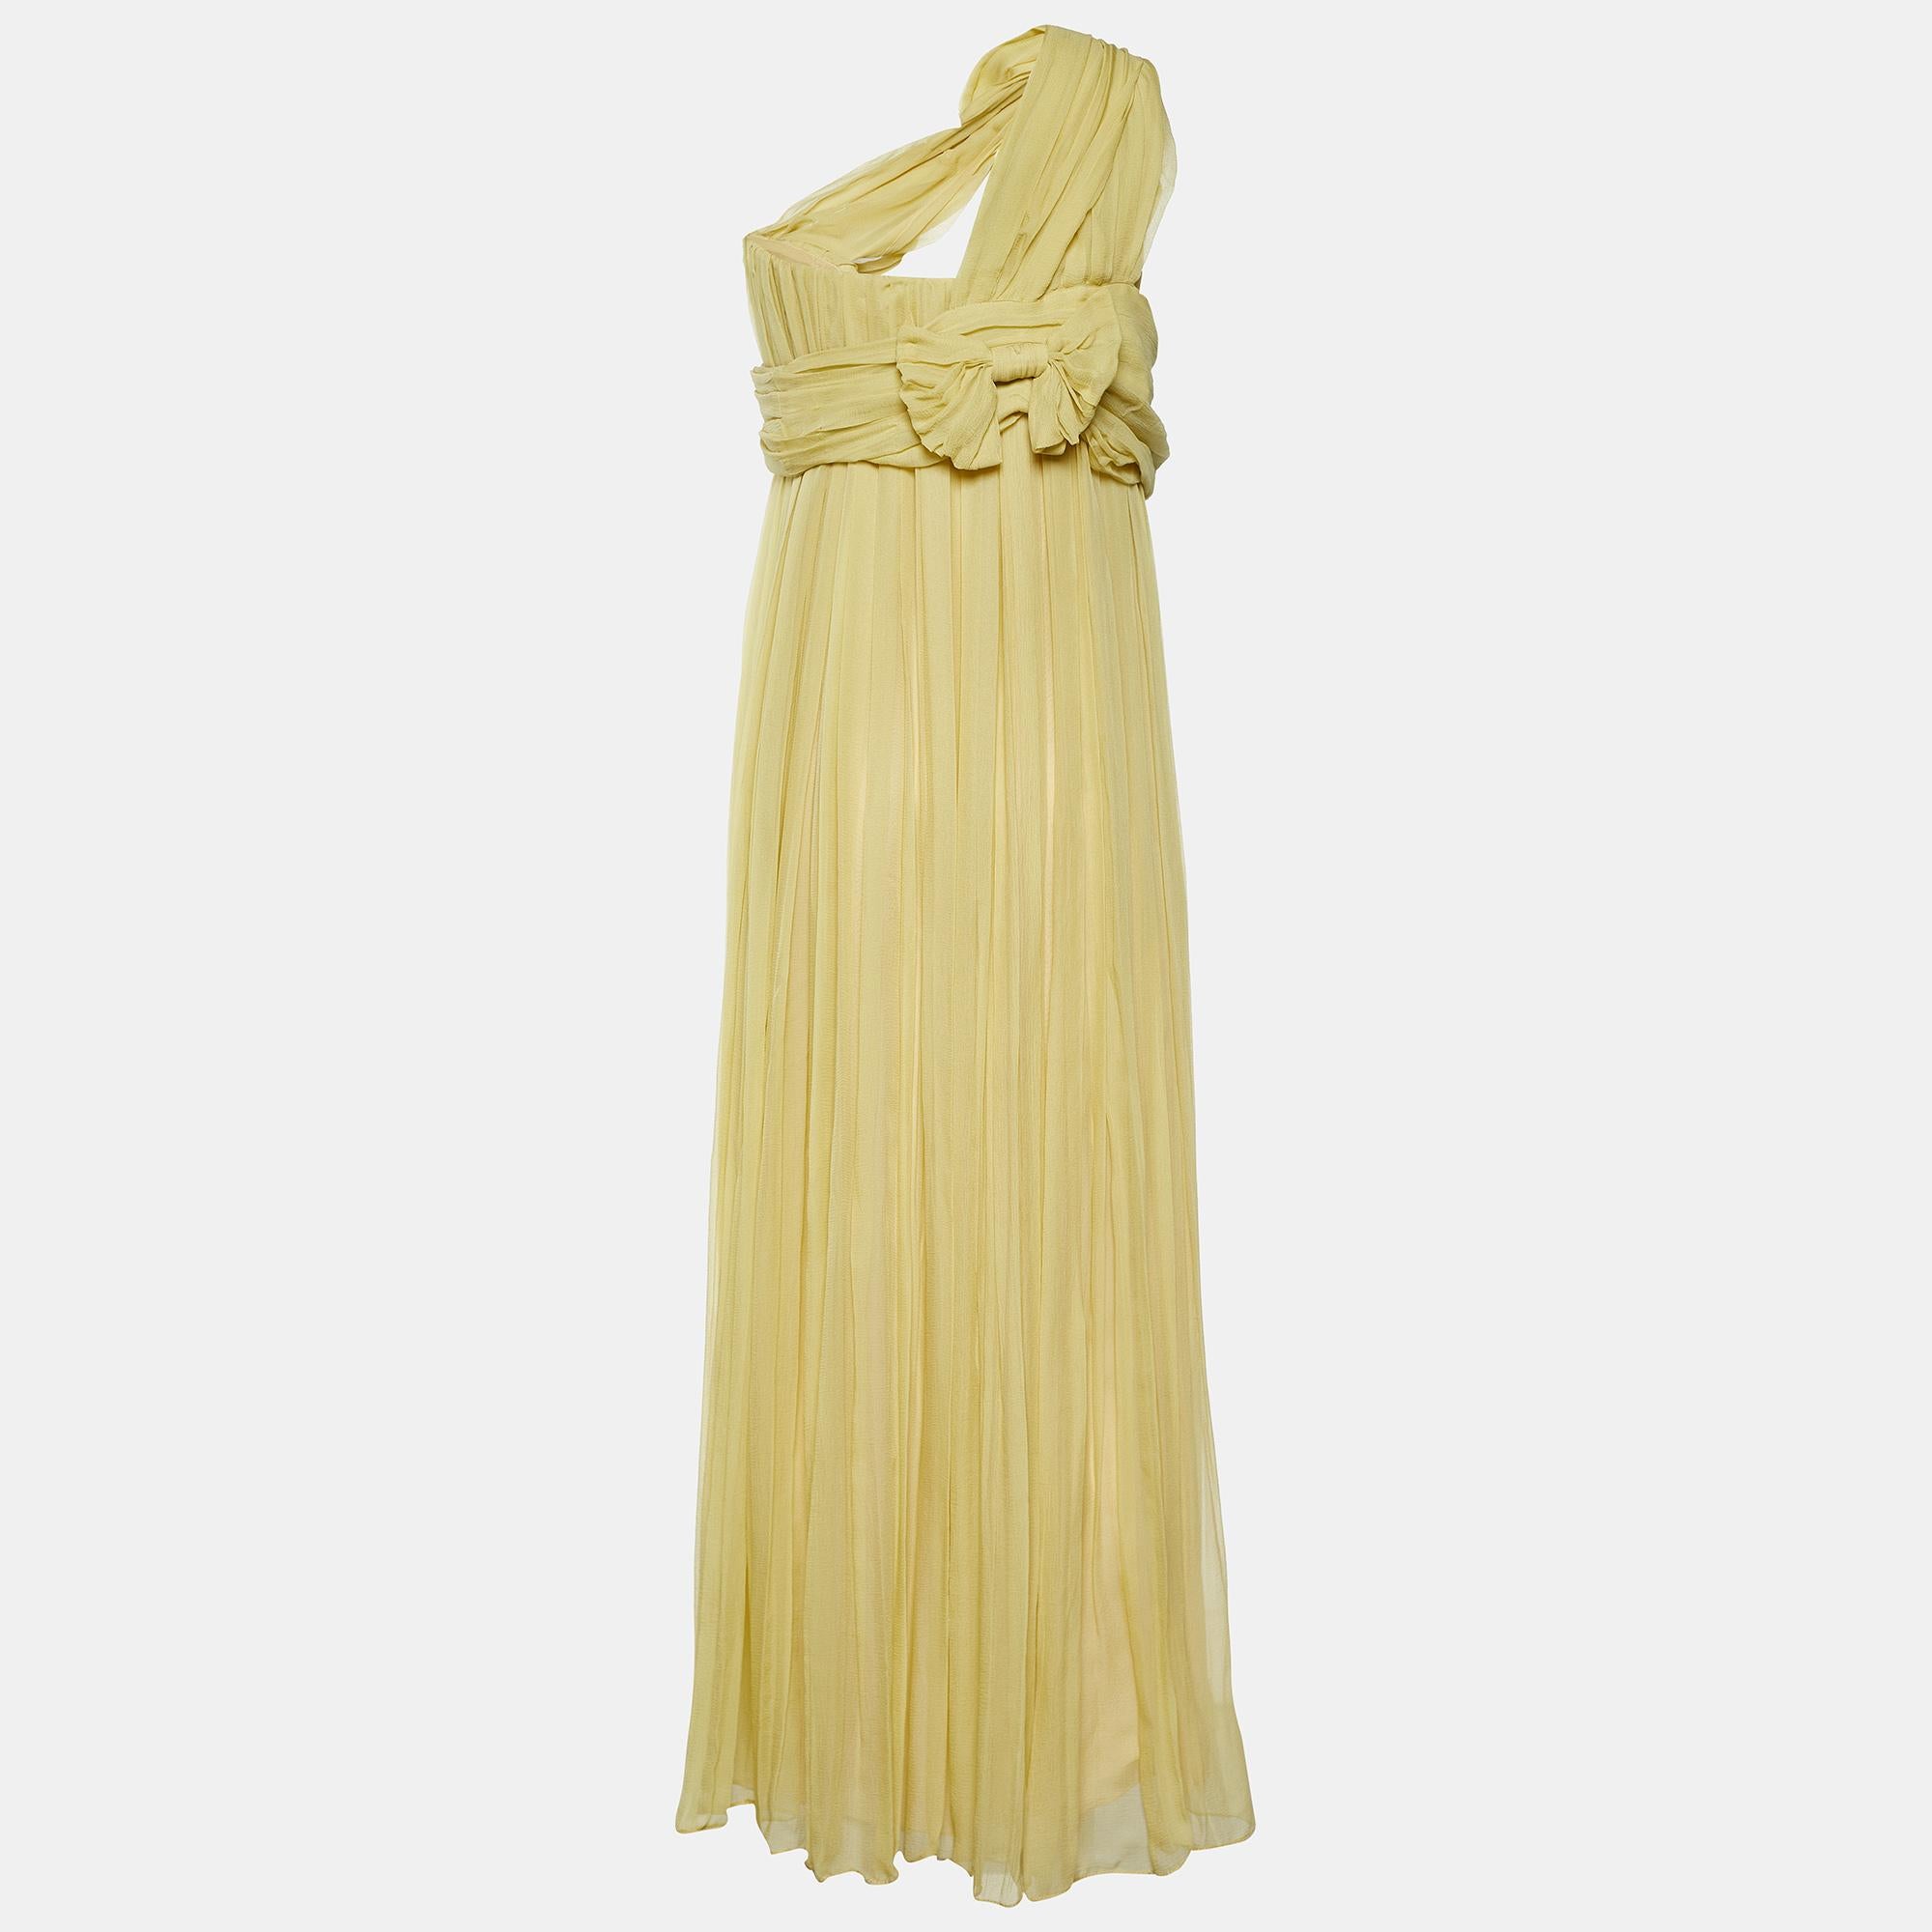 Chloe's new creation spells out subtle glam and gracefulness quite effortlessly. The one-shoulder silhouette complemented by soft georgette will make you look straight out of a dream. The dress has pleated formations, with its skirt embracing a